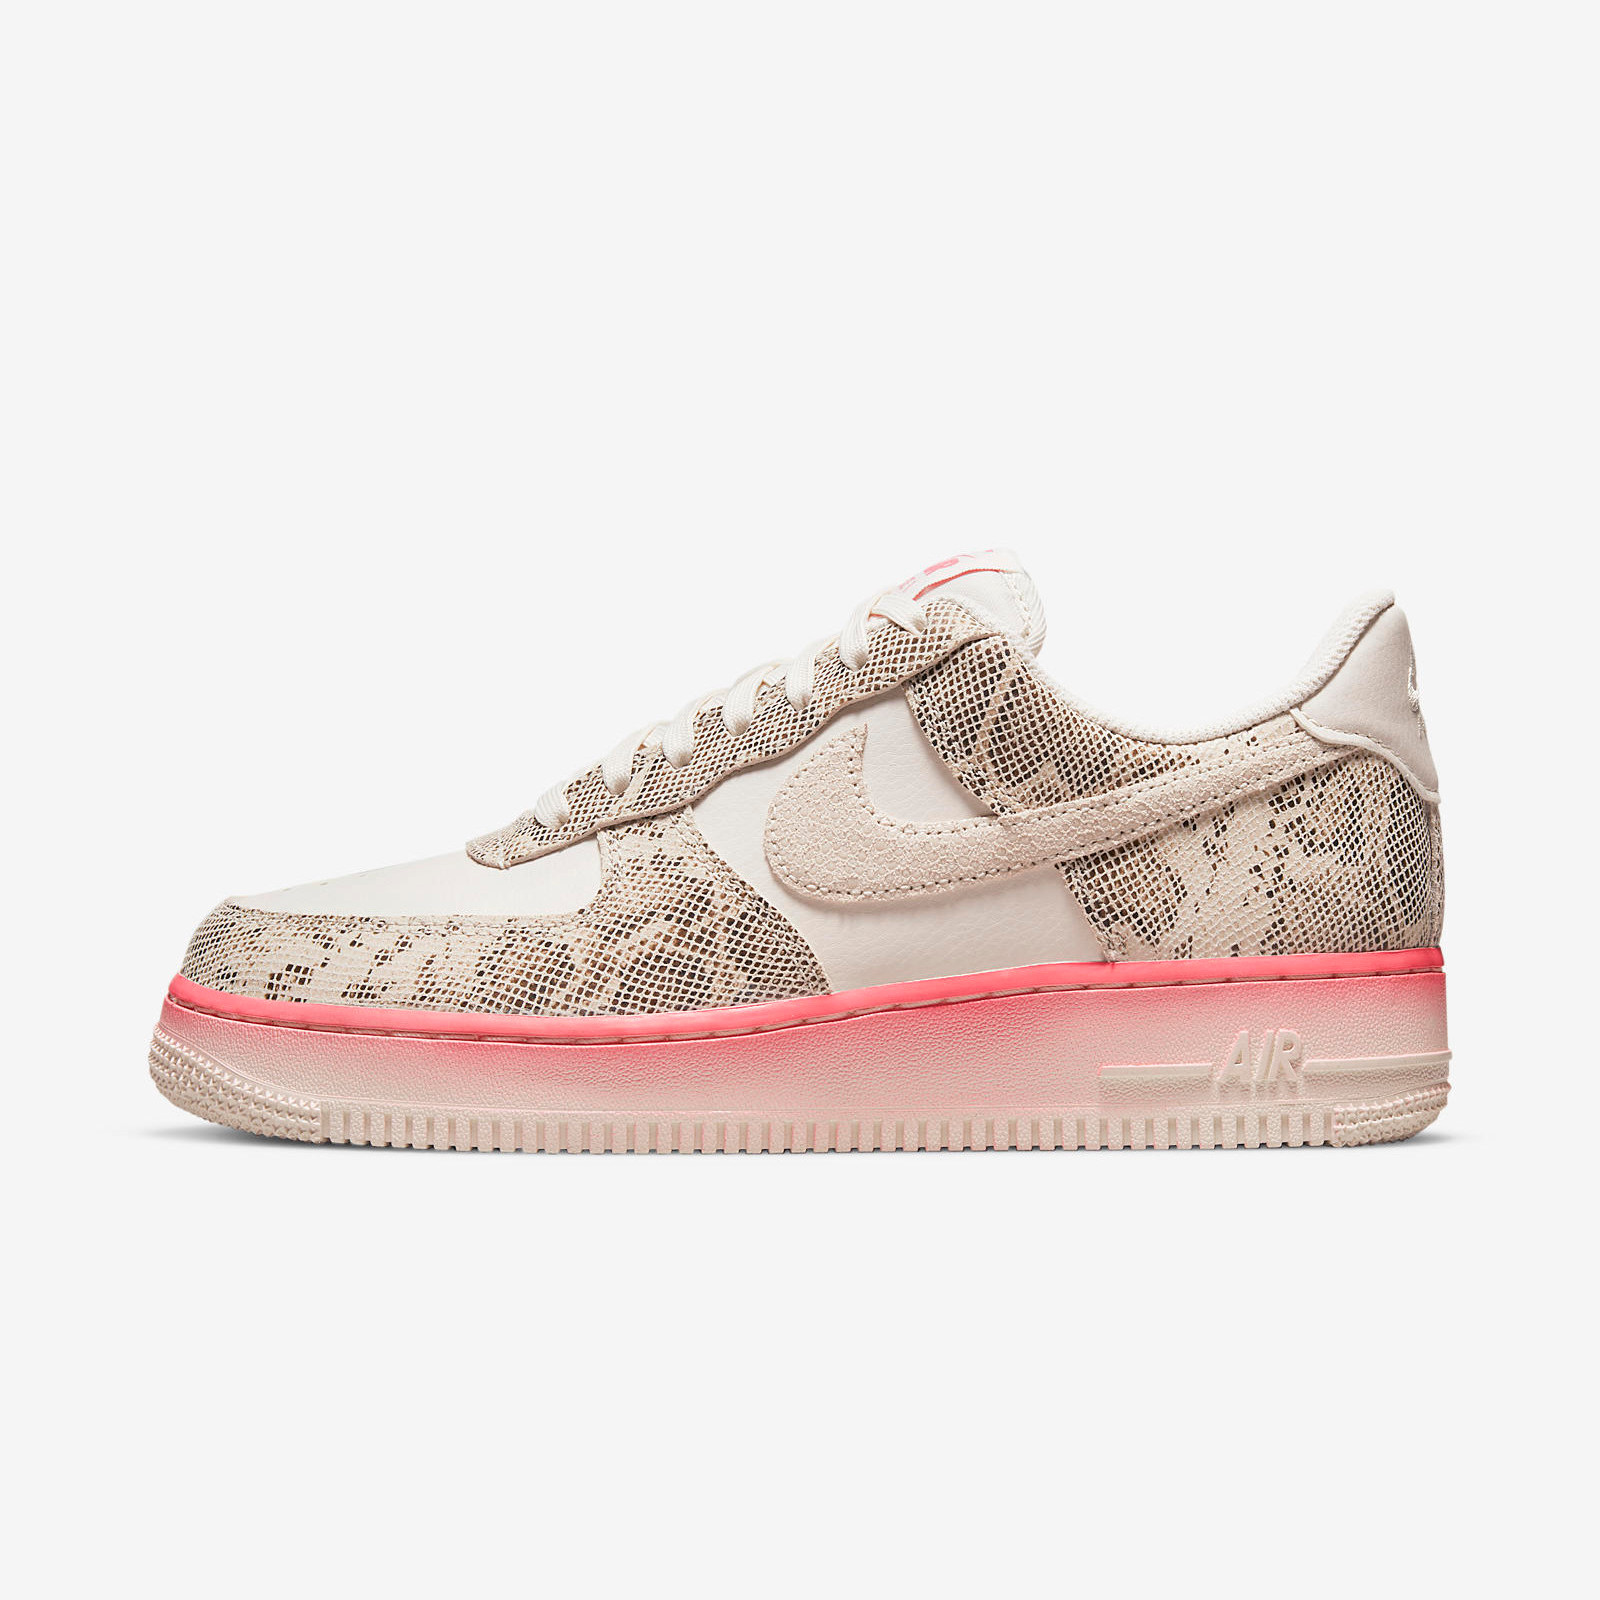 Nike Air Force 1
« Our Force 1 »